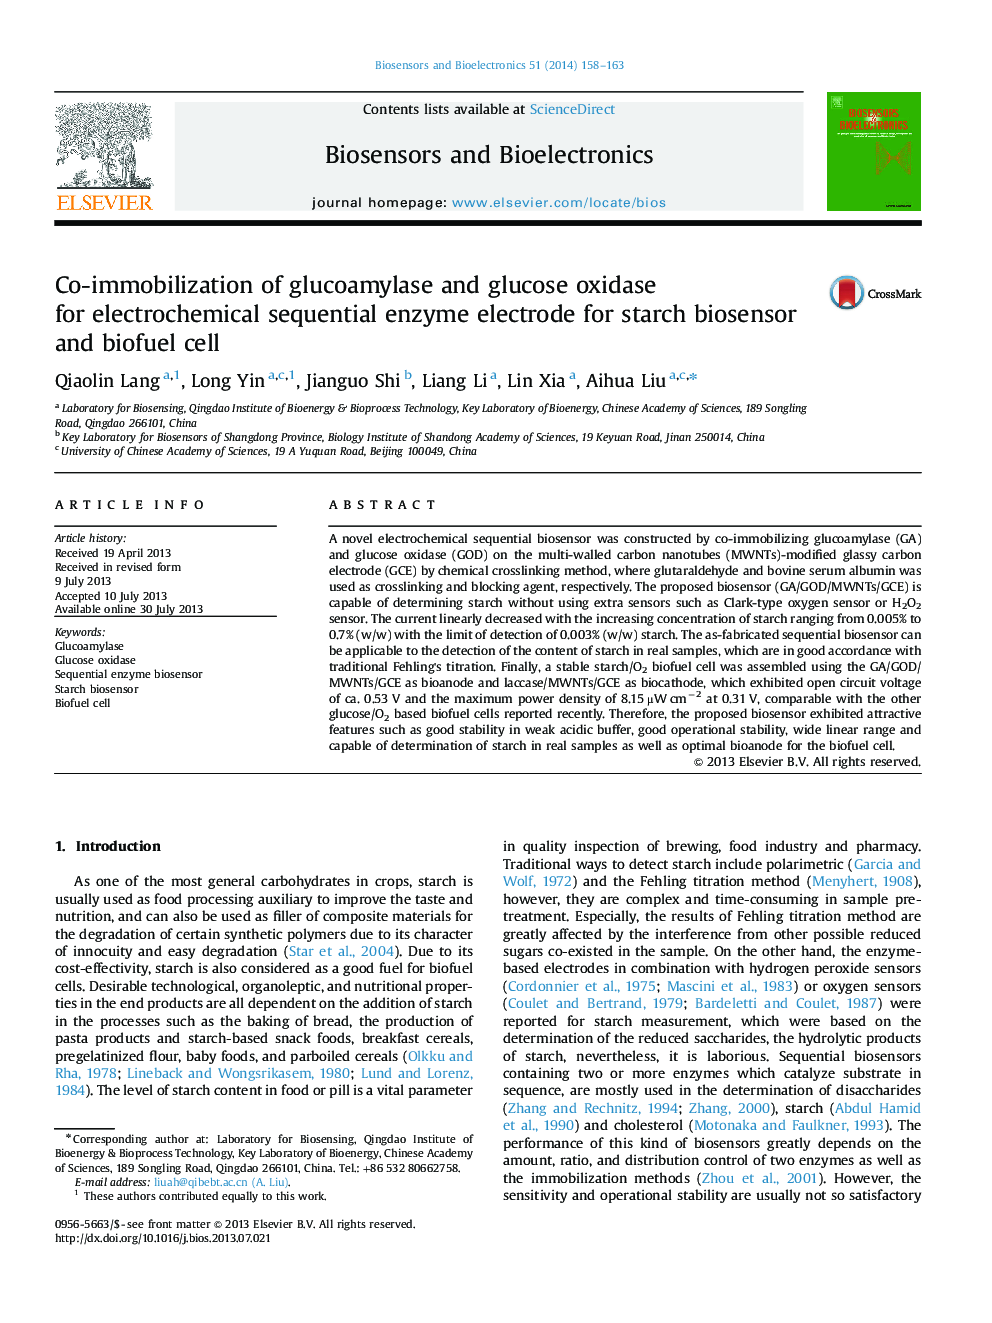 Co-immobilization of glucoamylase and glucose oxidase for electrochemical sequential enzyme electrode for starch biosensor and biofuel cell